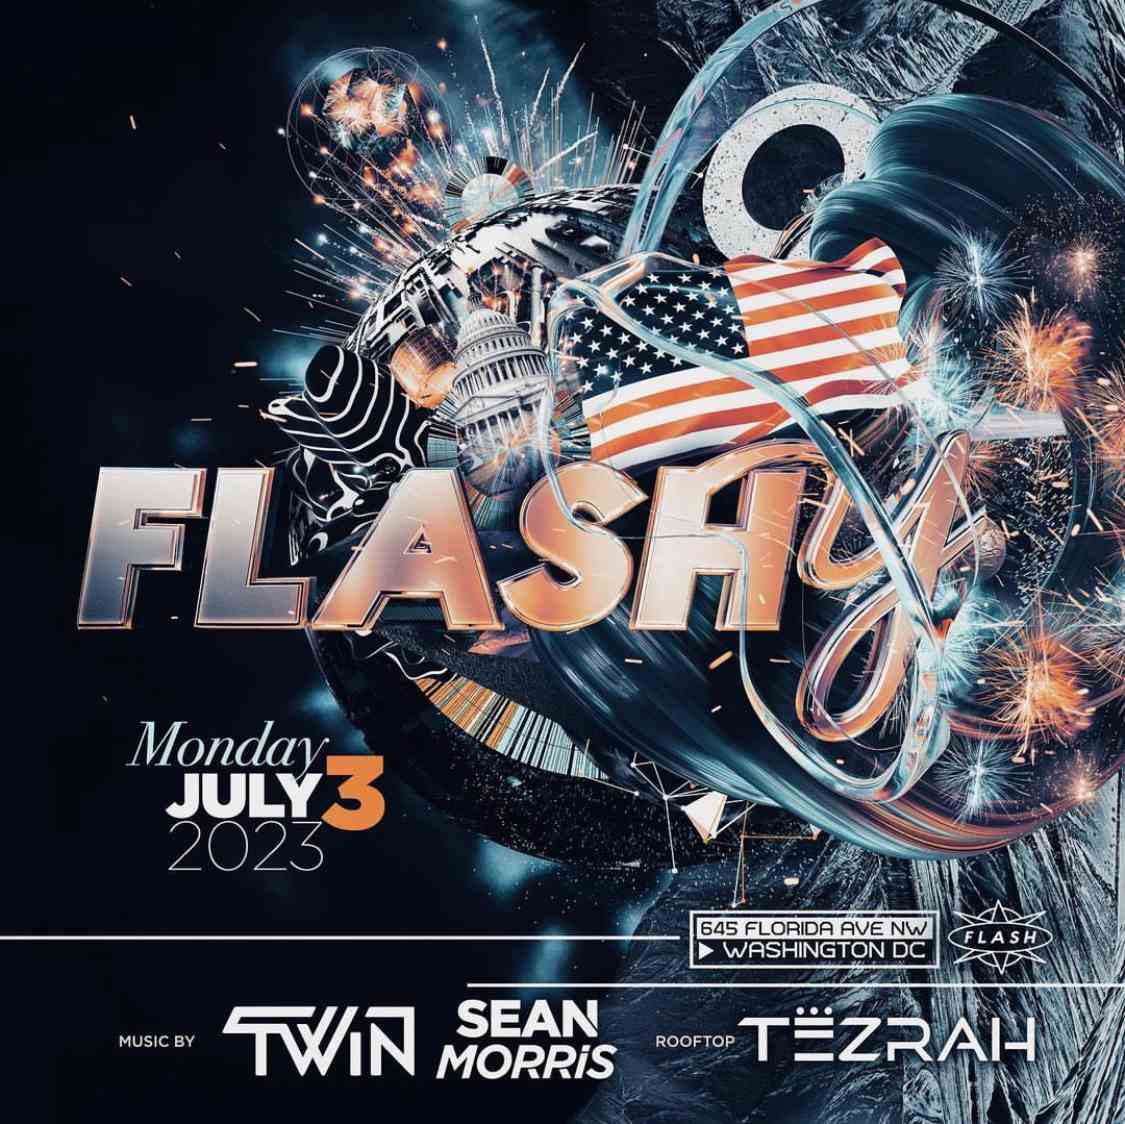 Flashy 4th of July Weekend! event flyer